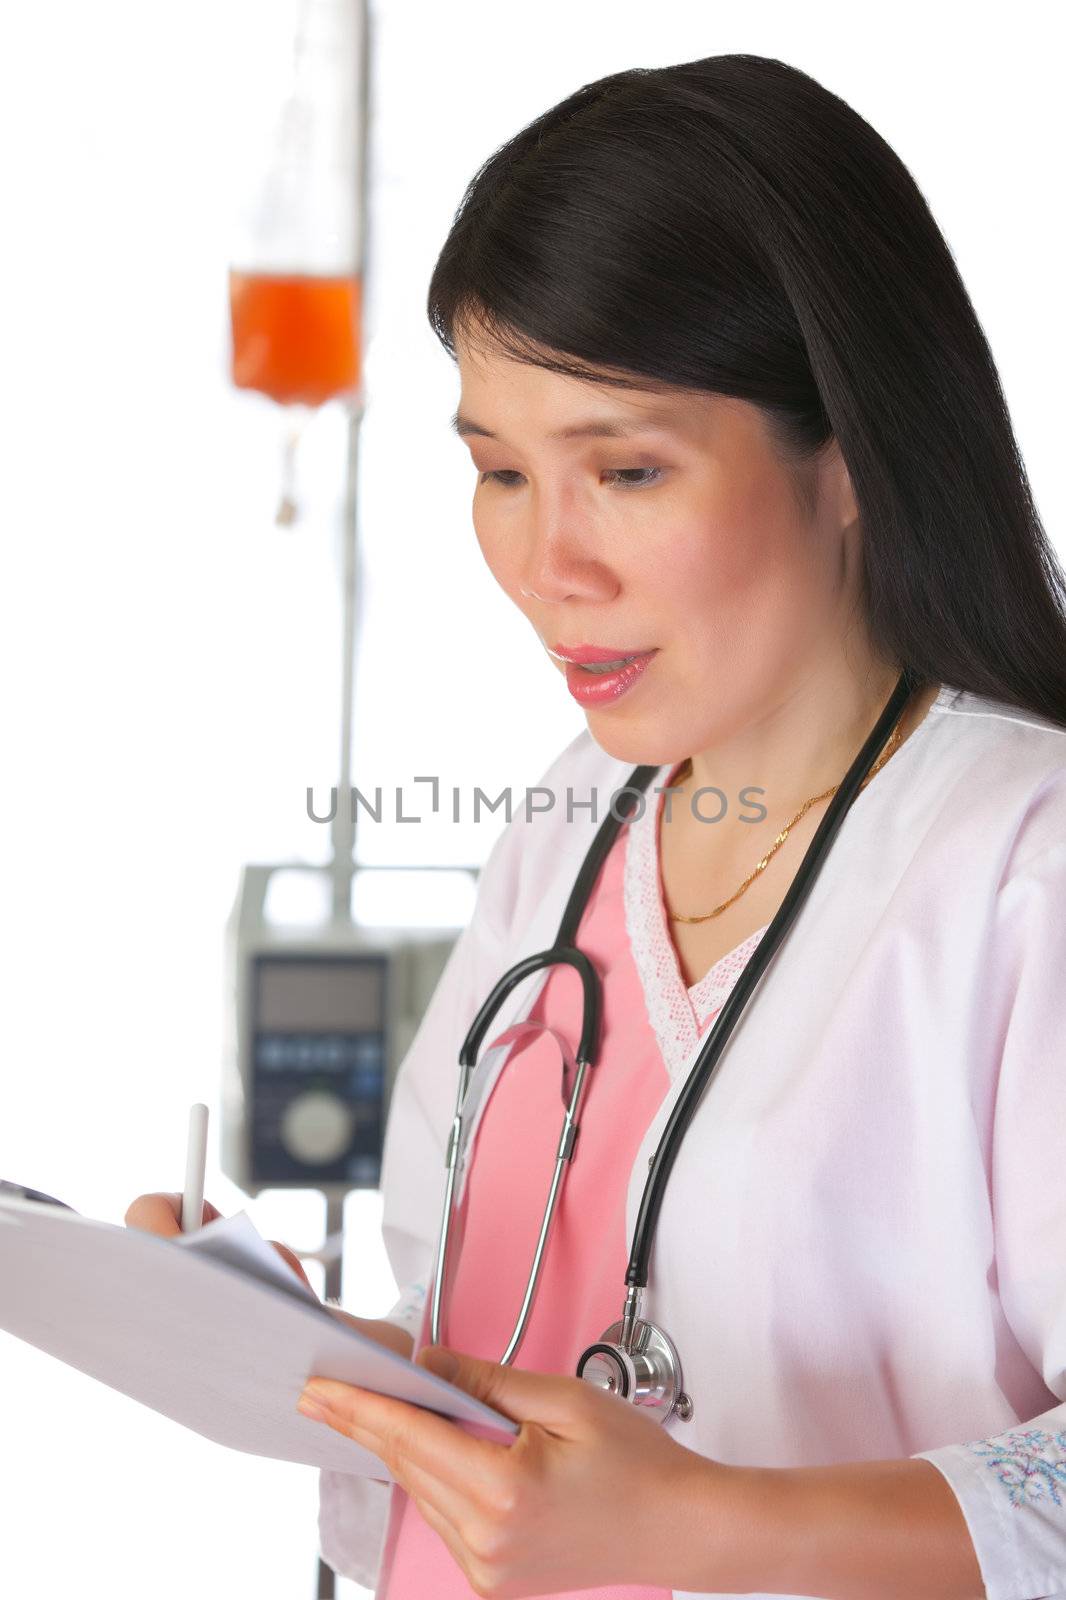 Attractive Asian female nurse in clinic environment with chart. IV Pump and blood in background.